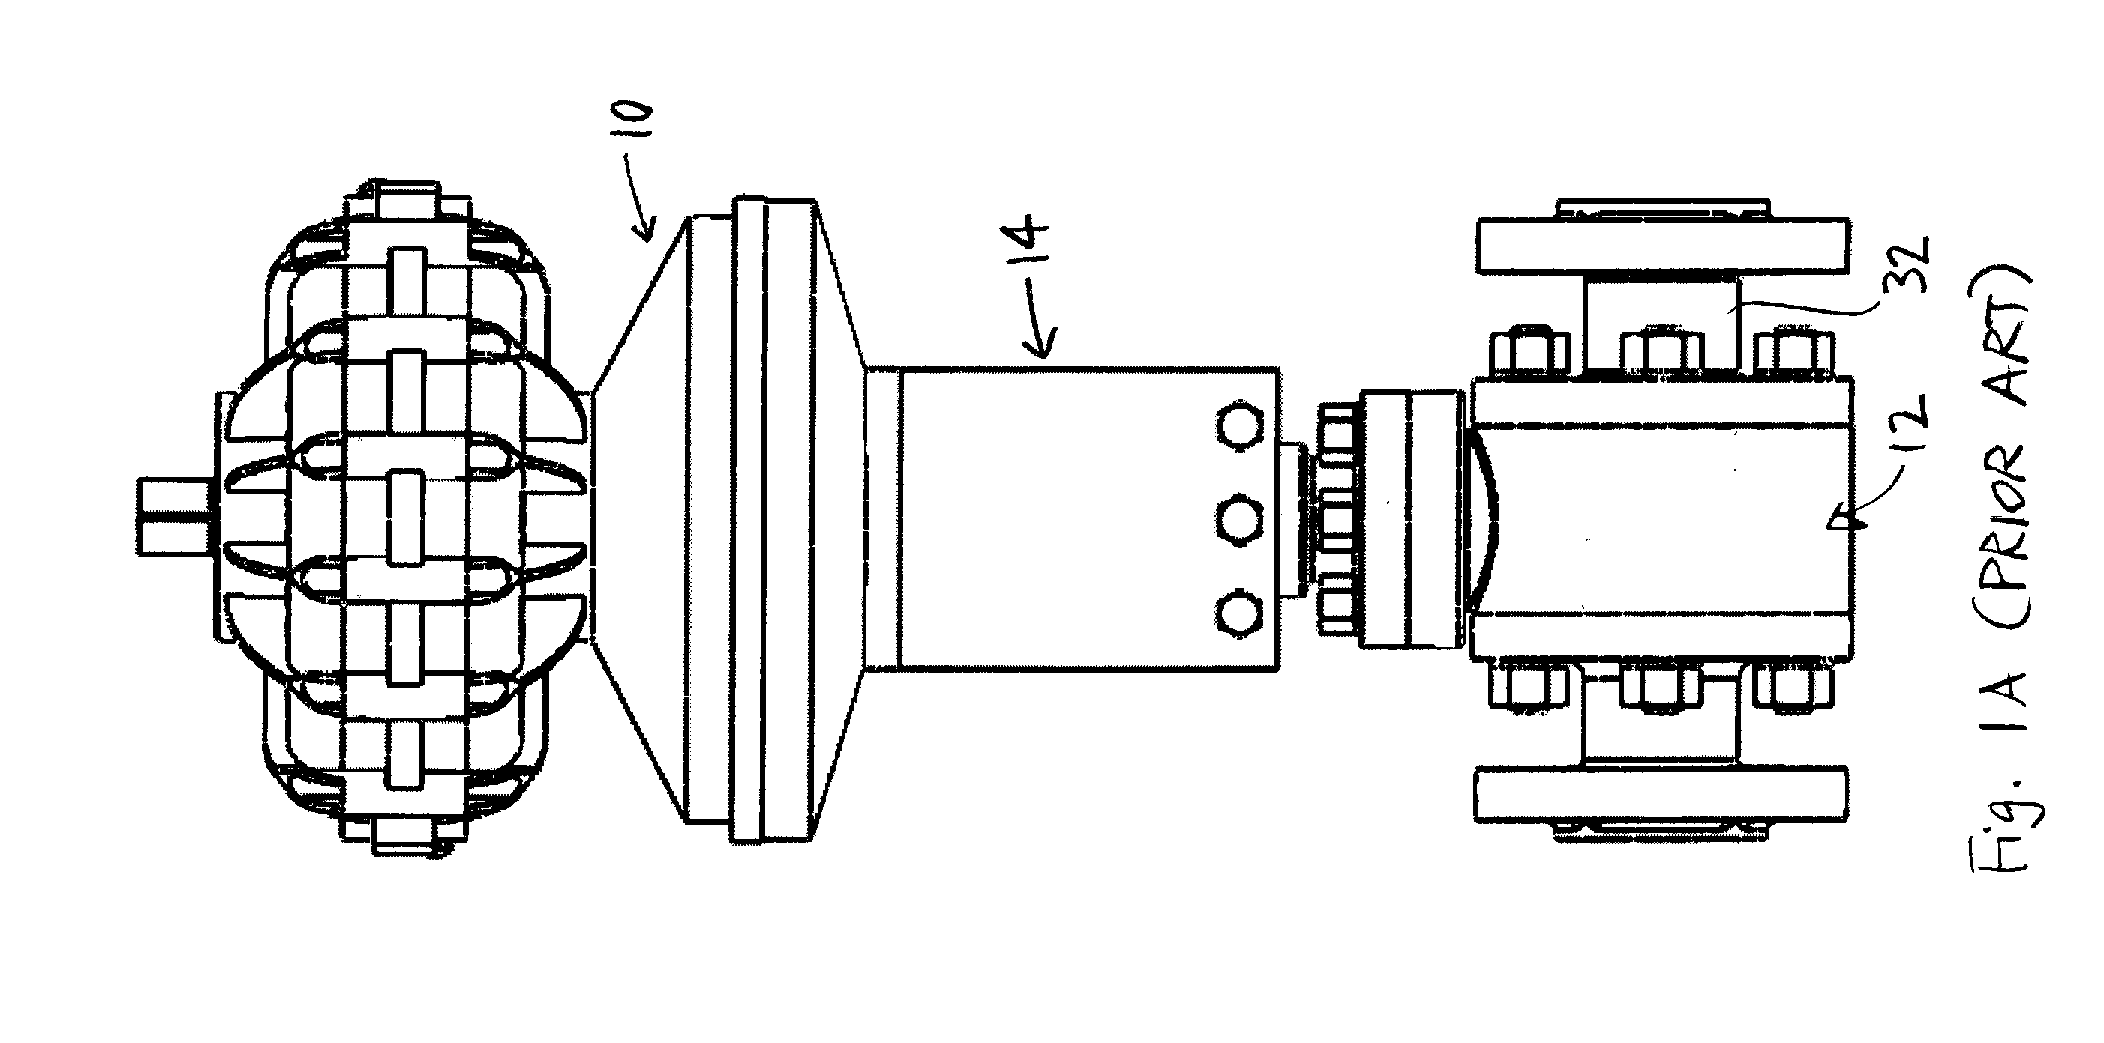 Actuator mounting assembly